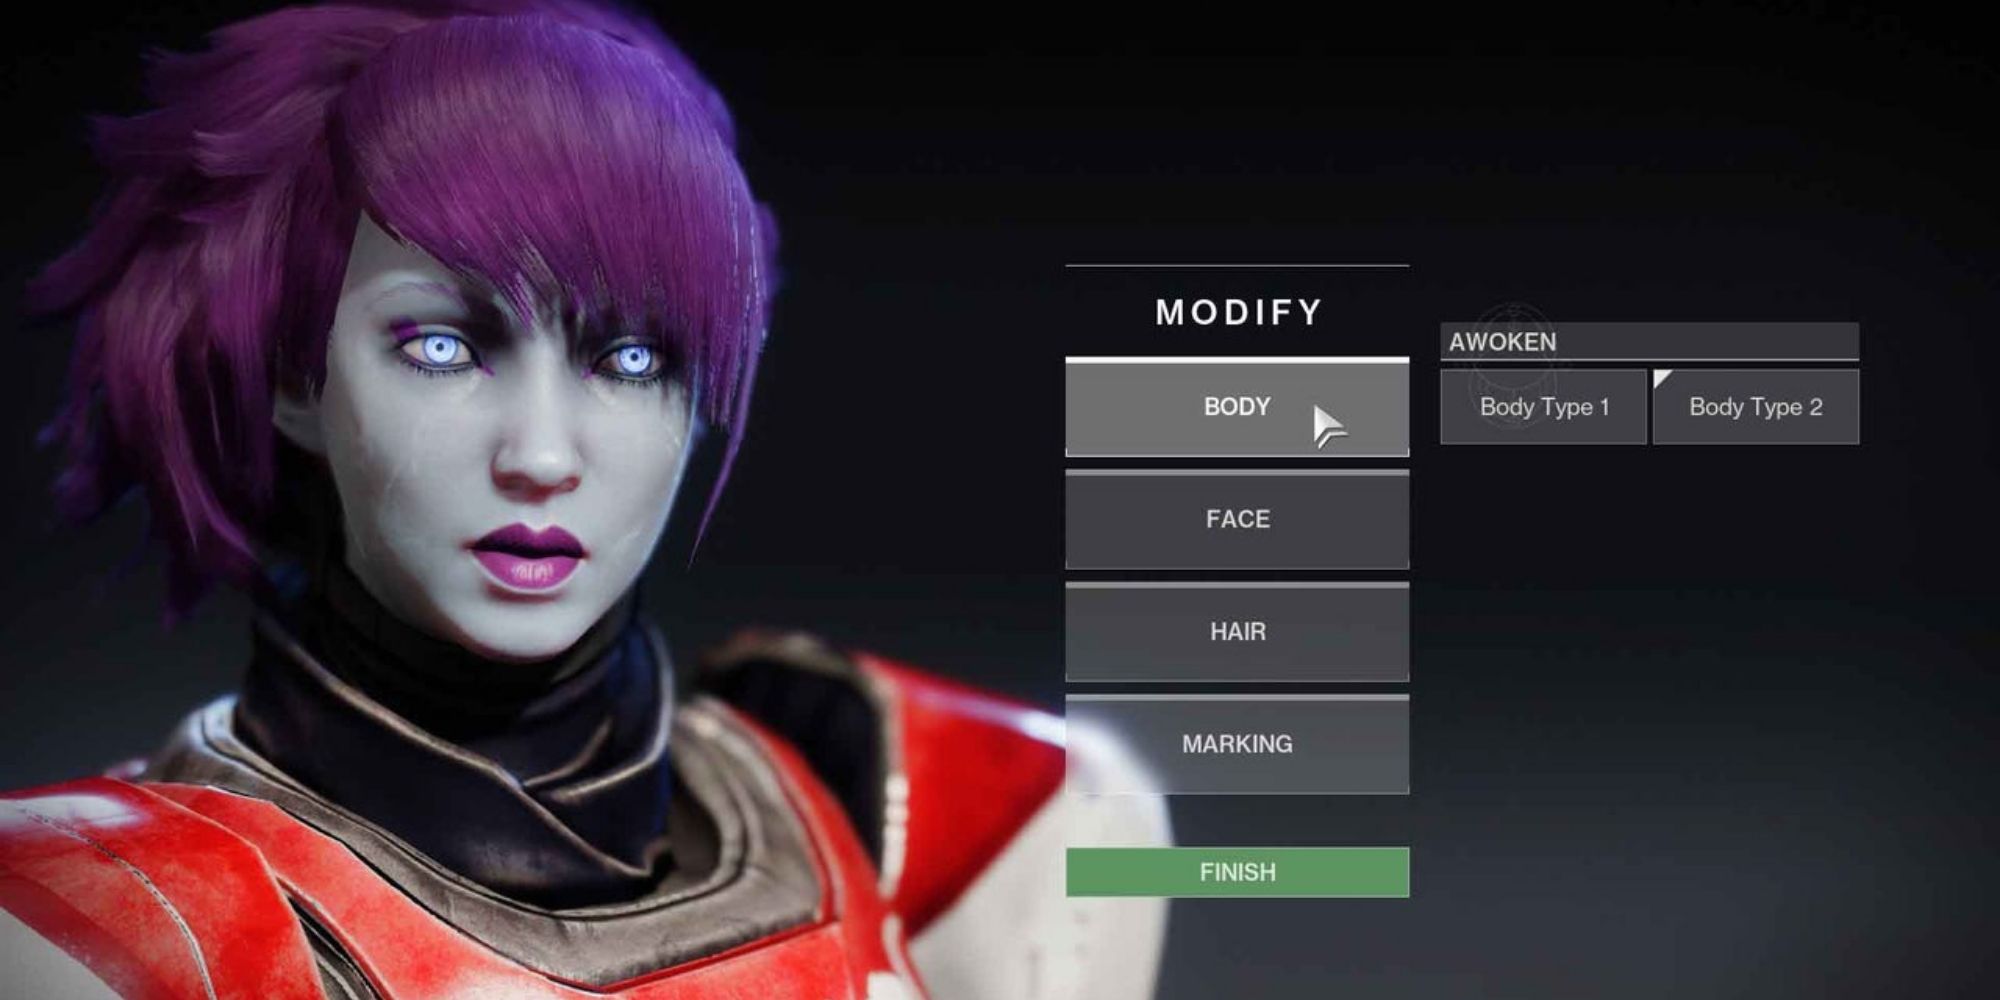 A Destiny character with grey skin and purple hair stood next to several customization options